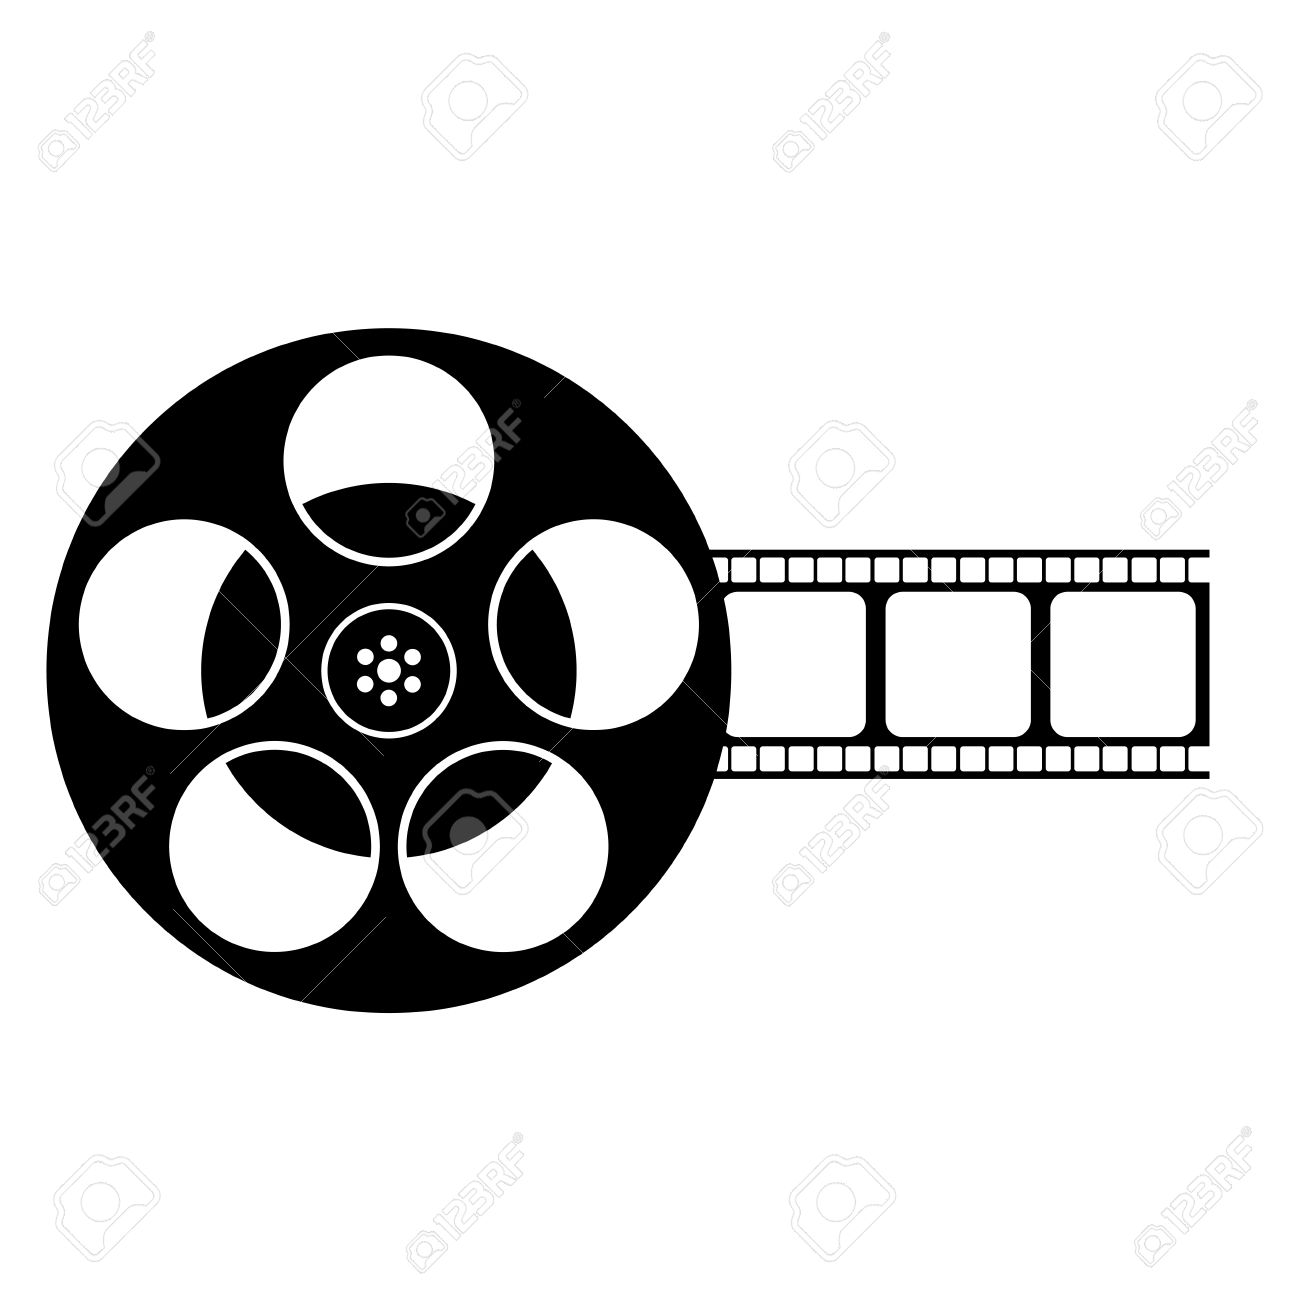 29536318-Black-And-White-Film-Reel-Icon-Isolated-Stock-Vector.jpg